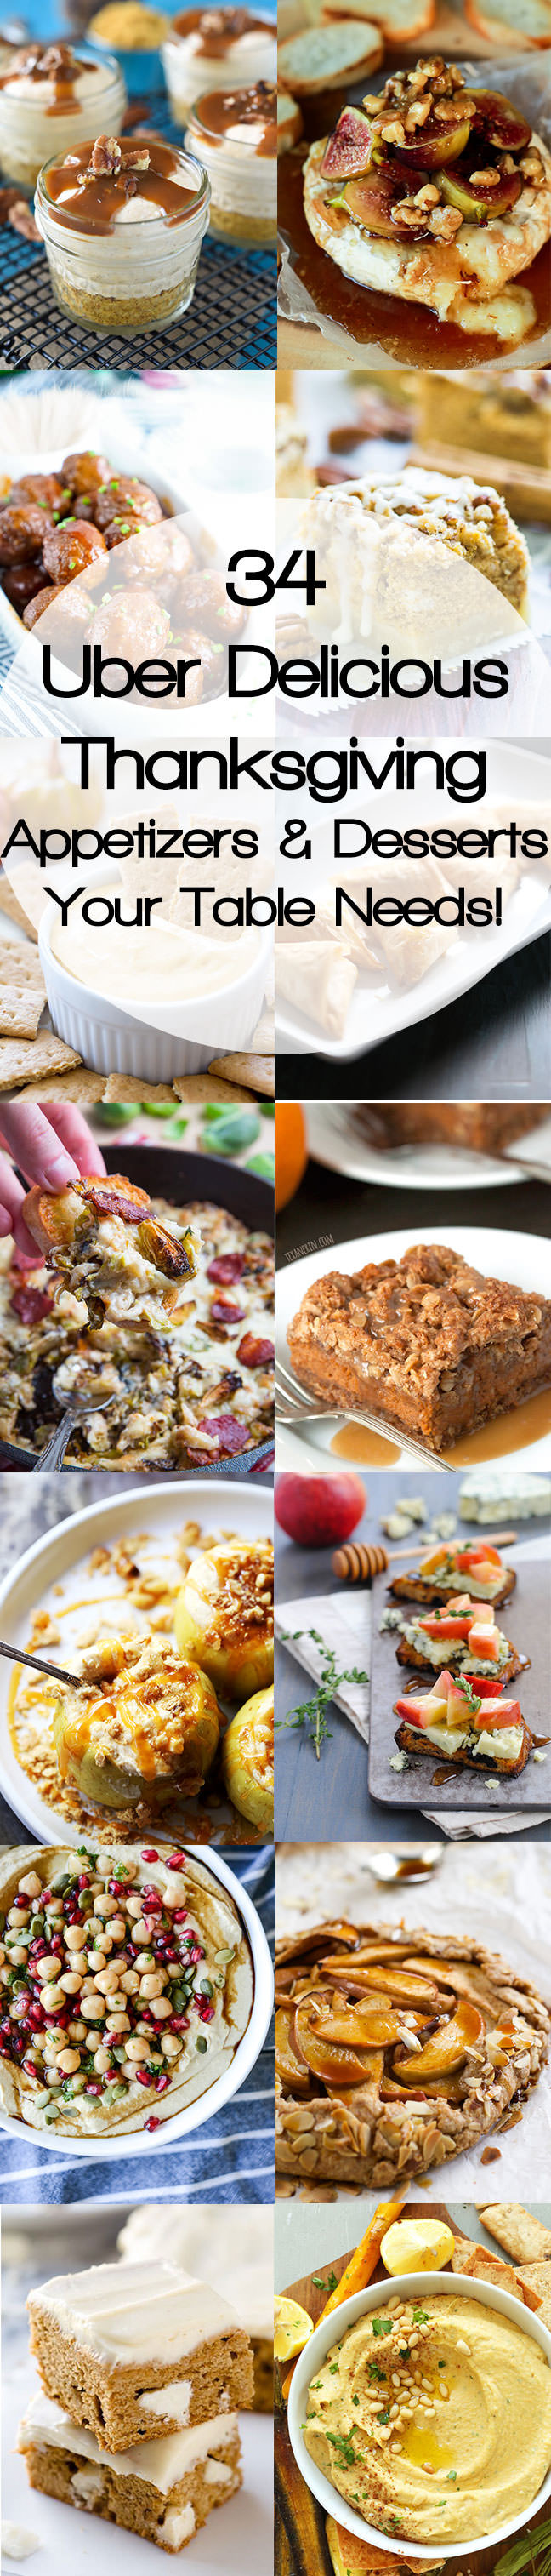 Healthy Thanksgiving Appetizers
 Healthy Thanksgiving Appetizers & Desserts